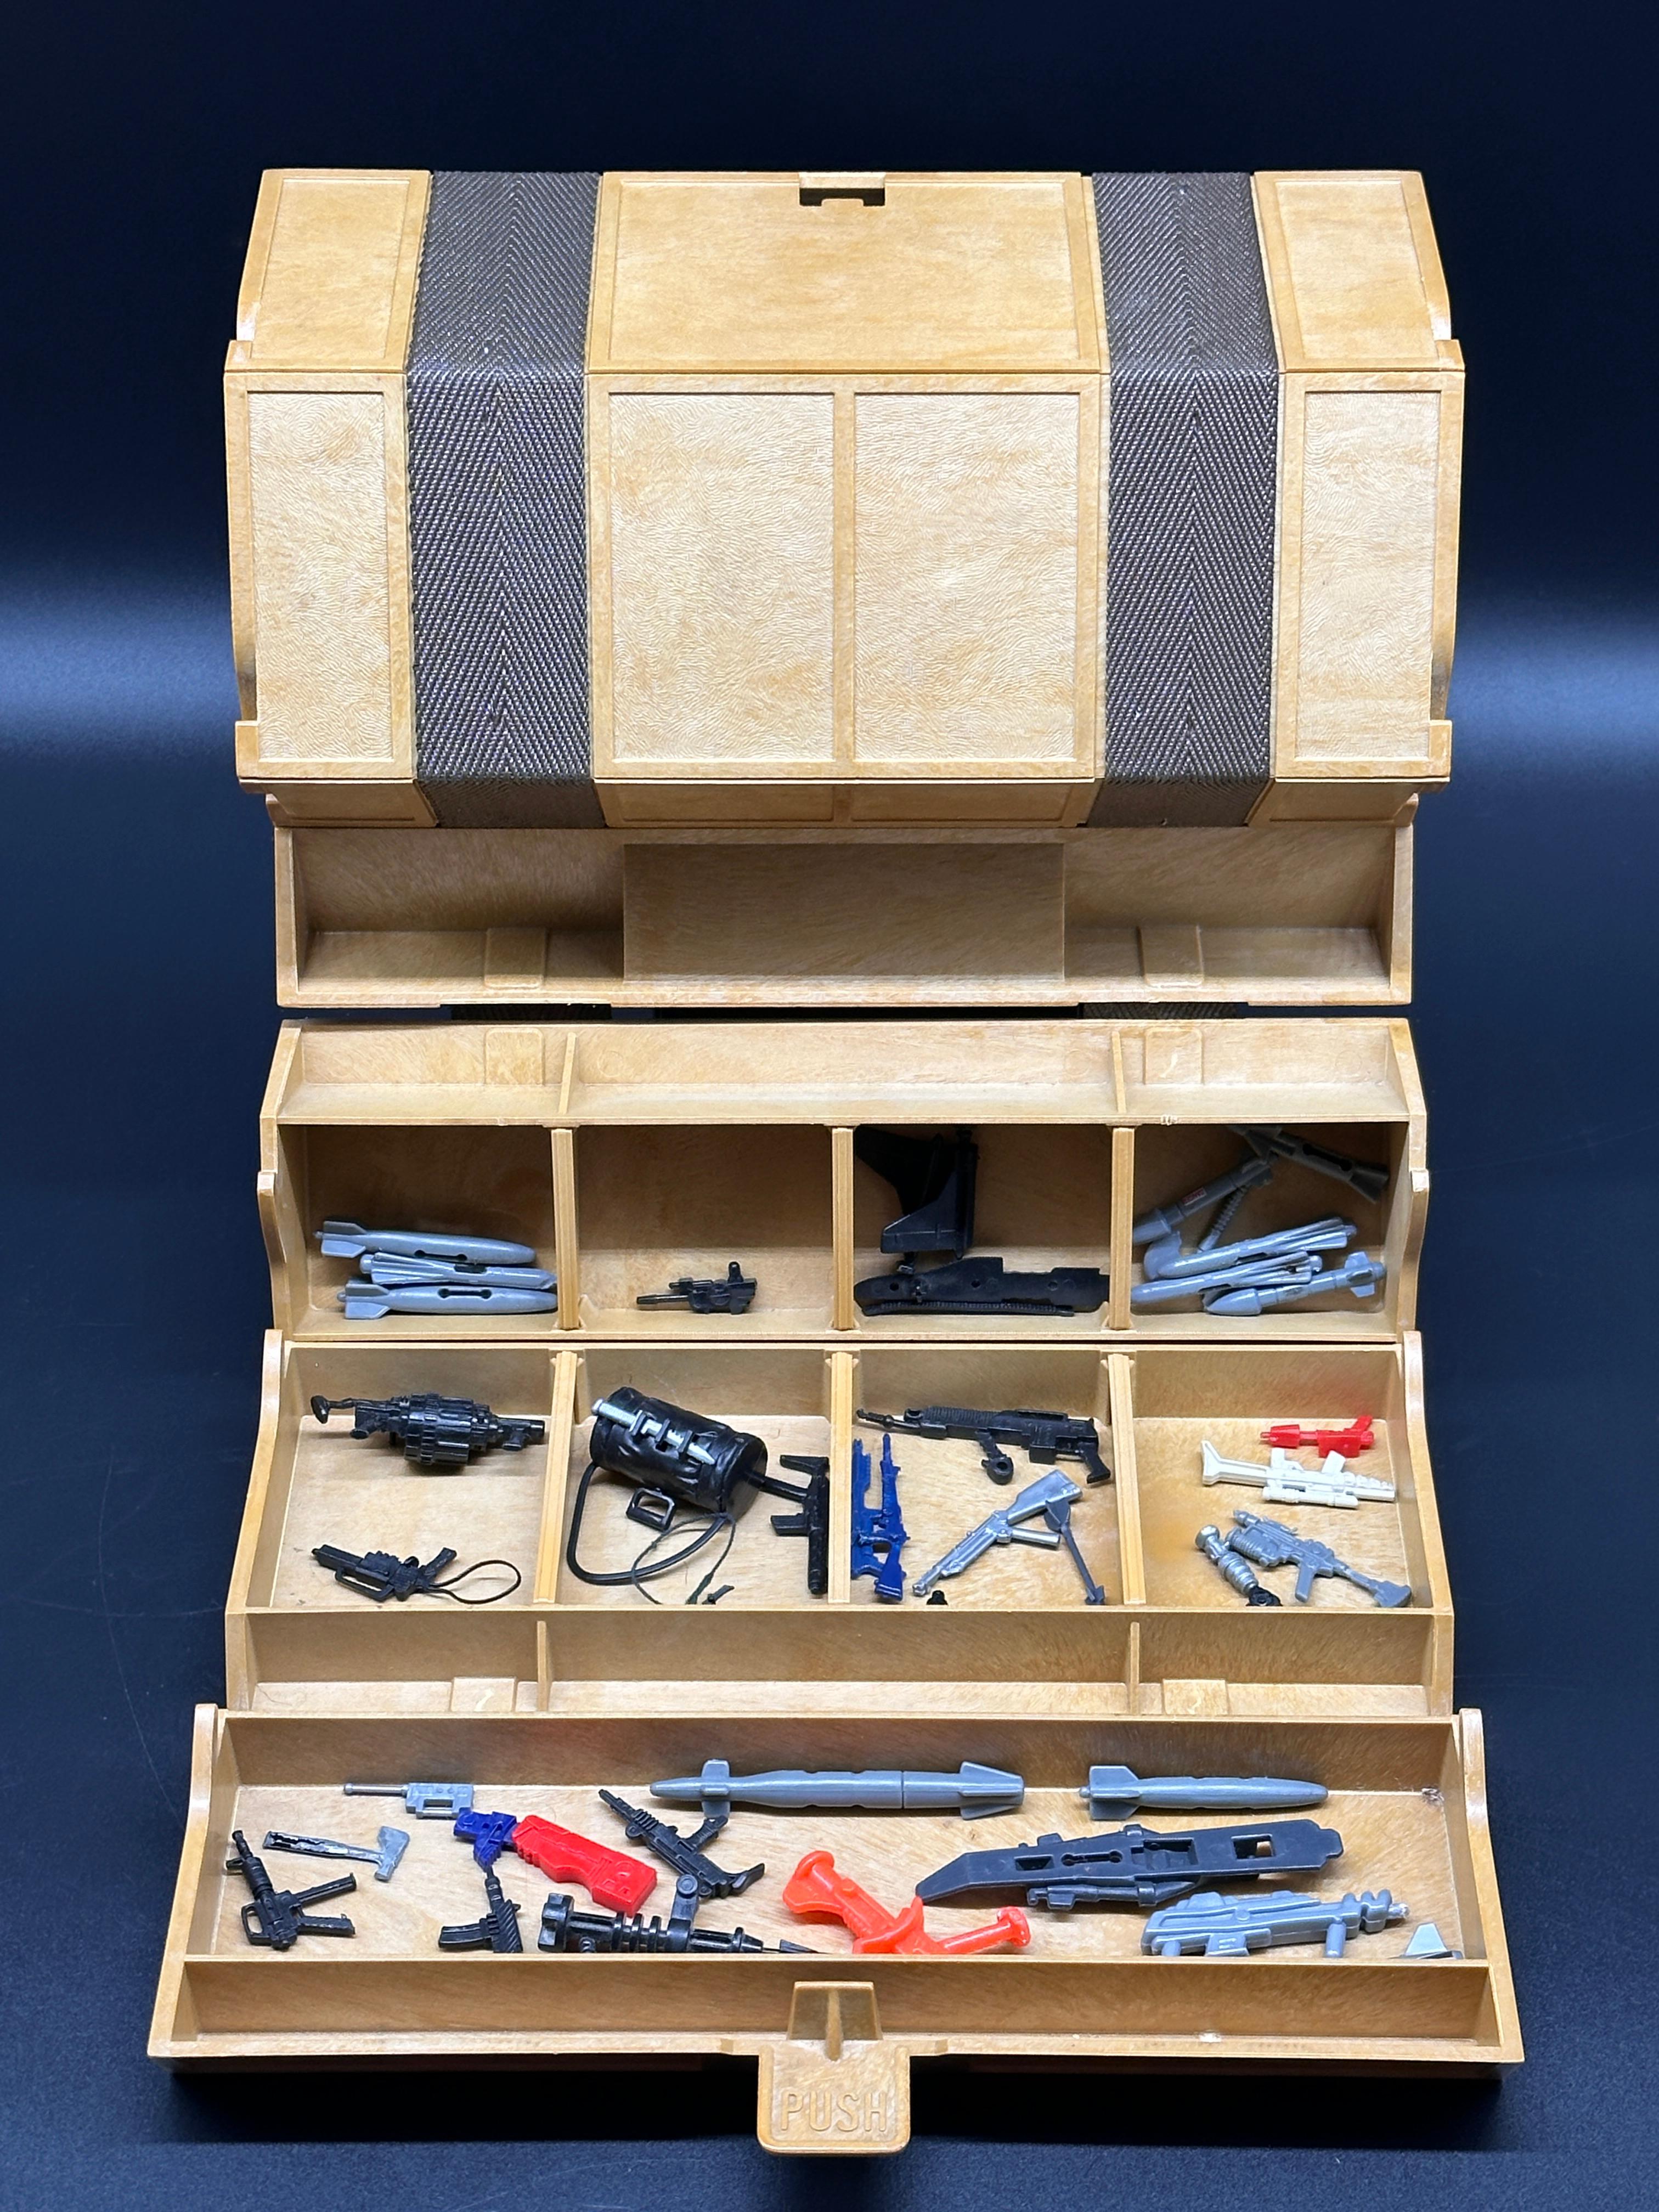 1973 Vintage RolyKit Rolling Storage Container and Misc. GI Joe Parts